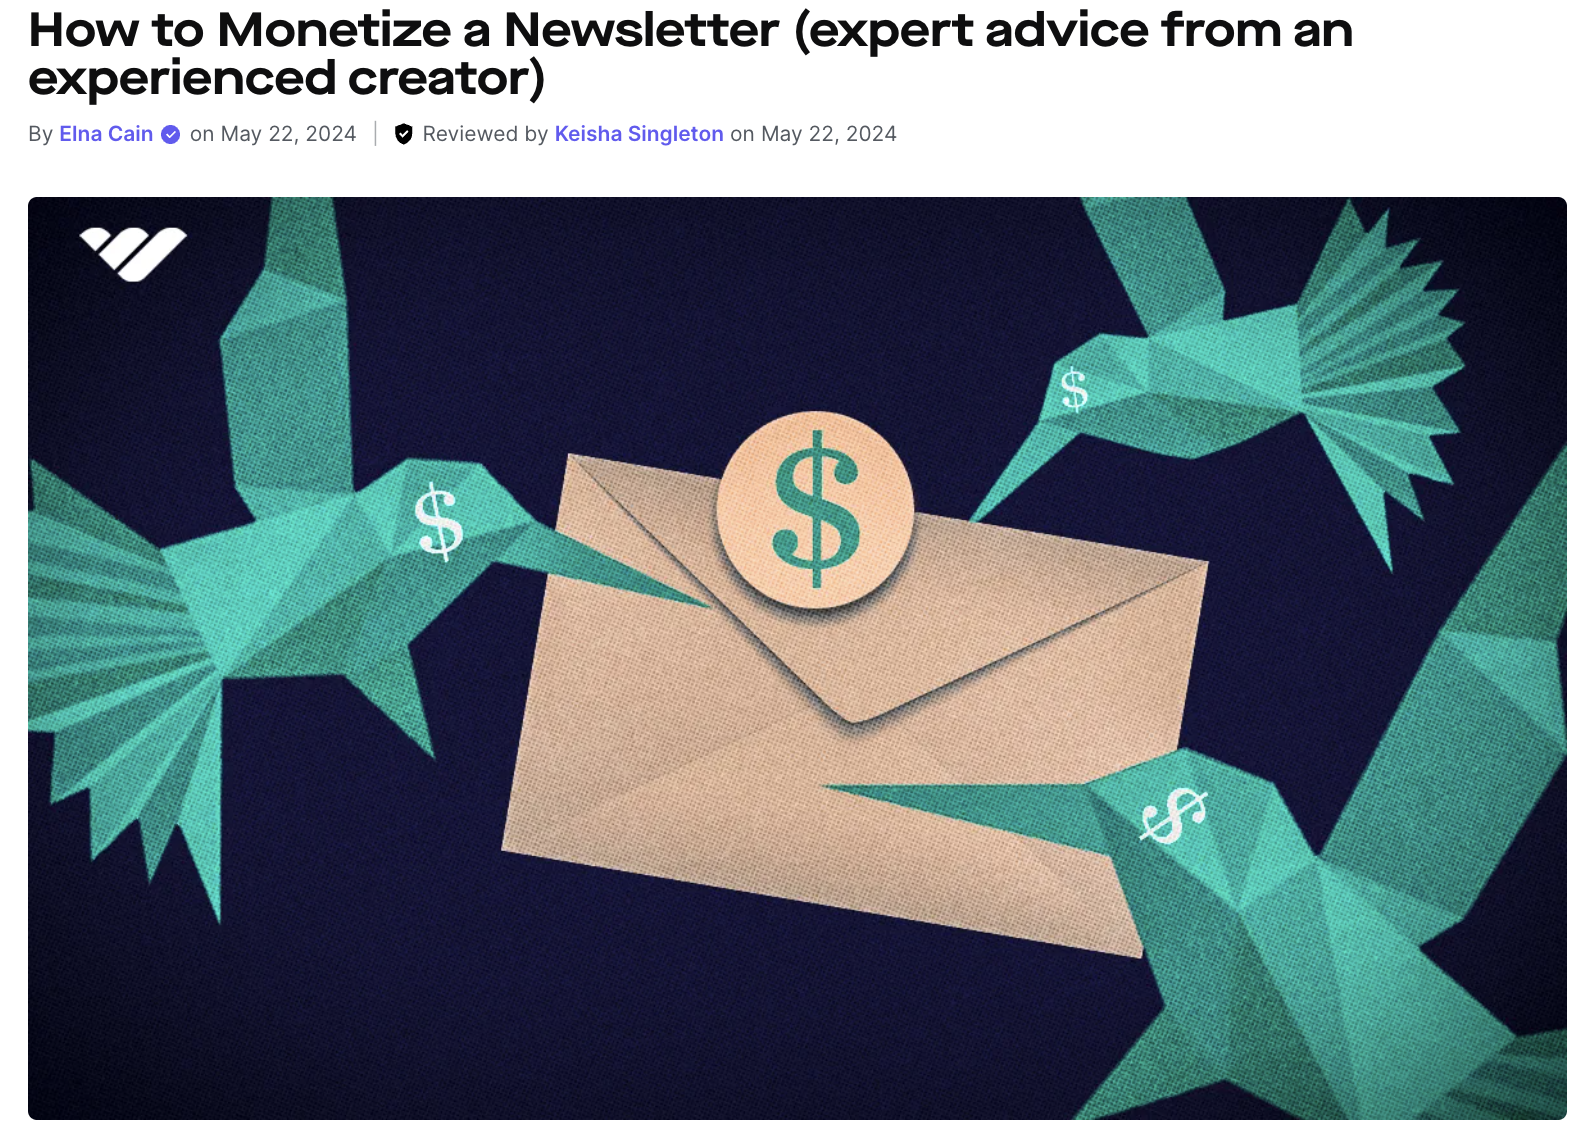 How to Monetize a Newsletter (expert advice from an experienced creator)